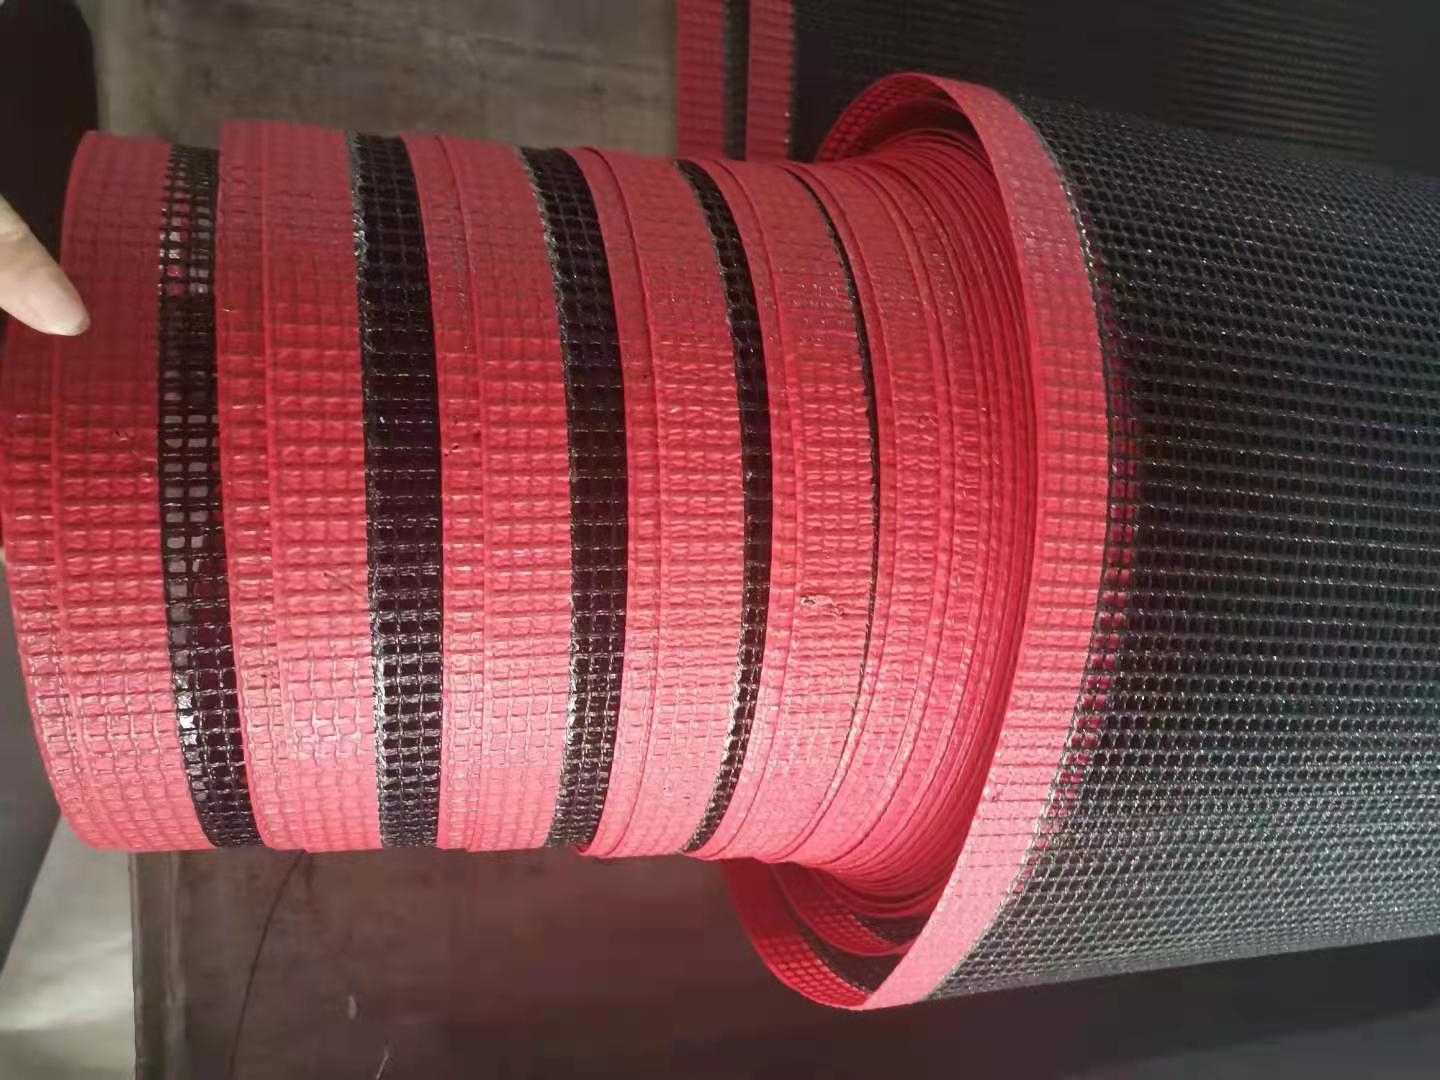 PTFE coated fabric for heat resistant belt